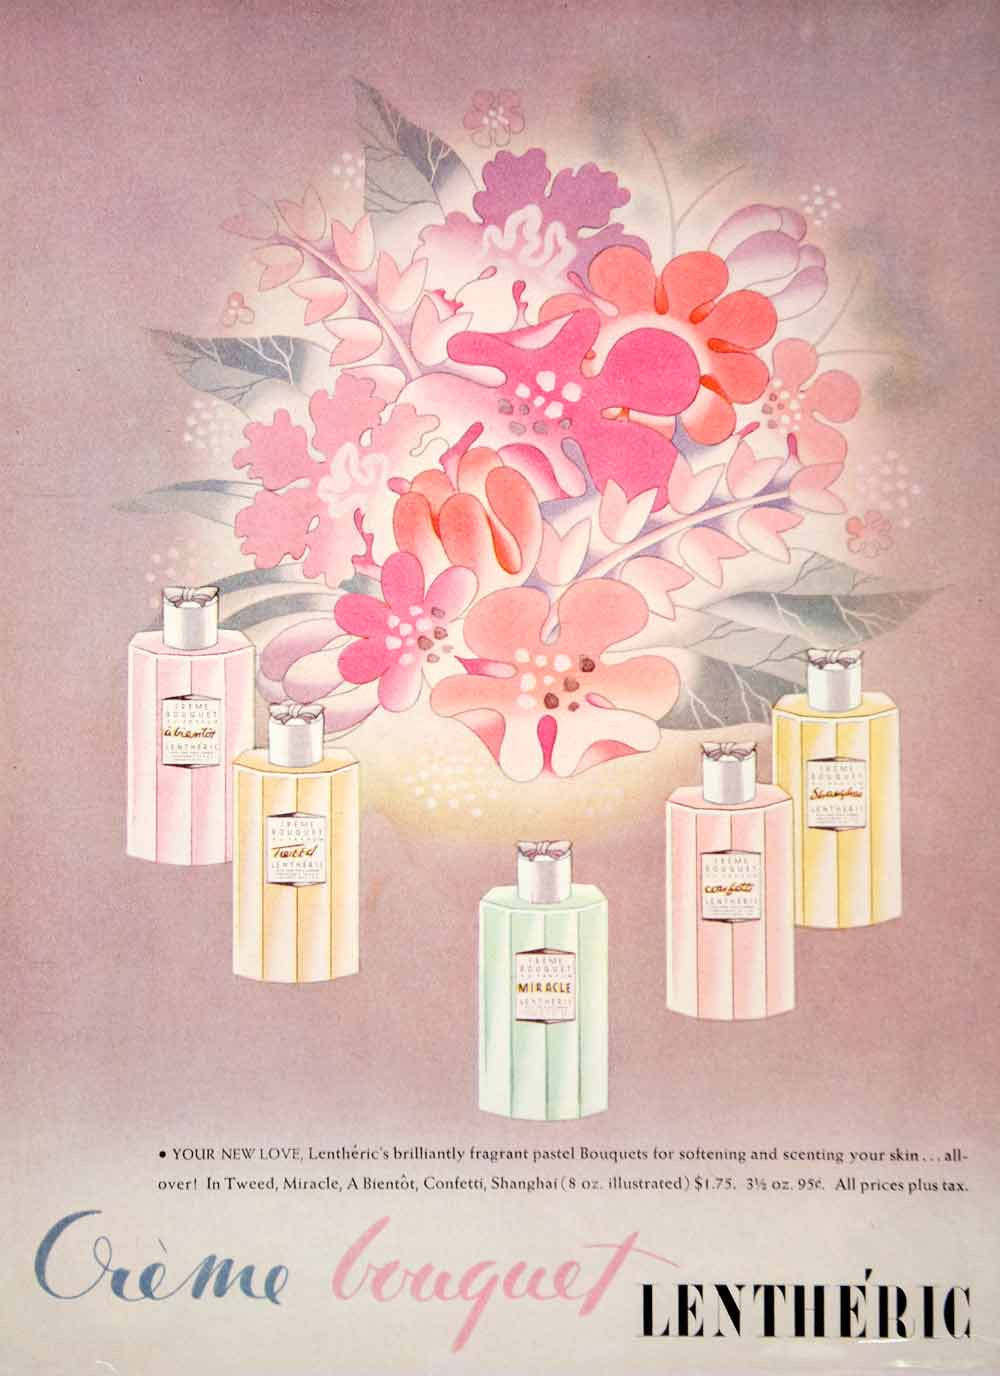 1944 Ad Vintage Lentheric Creme Bouquet Skin Care Perfume Scents Fragrance YHB4 - Period Paper
